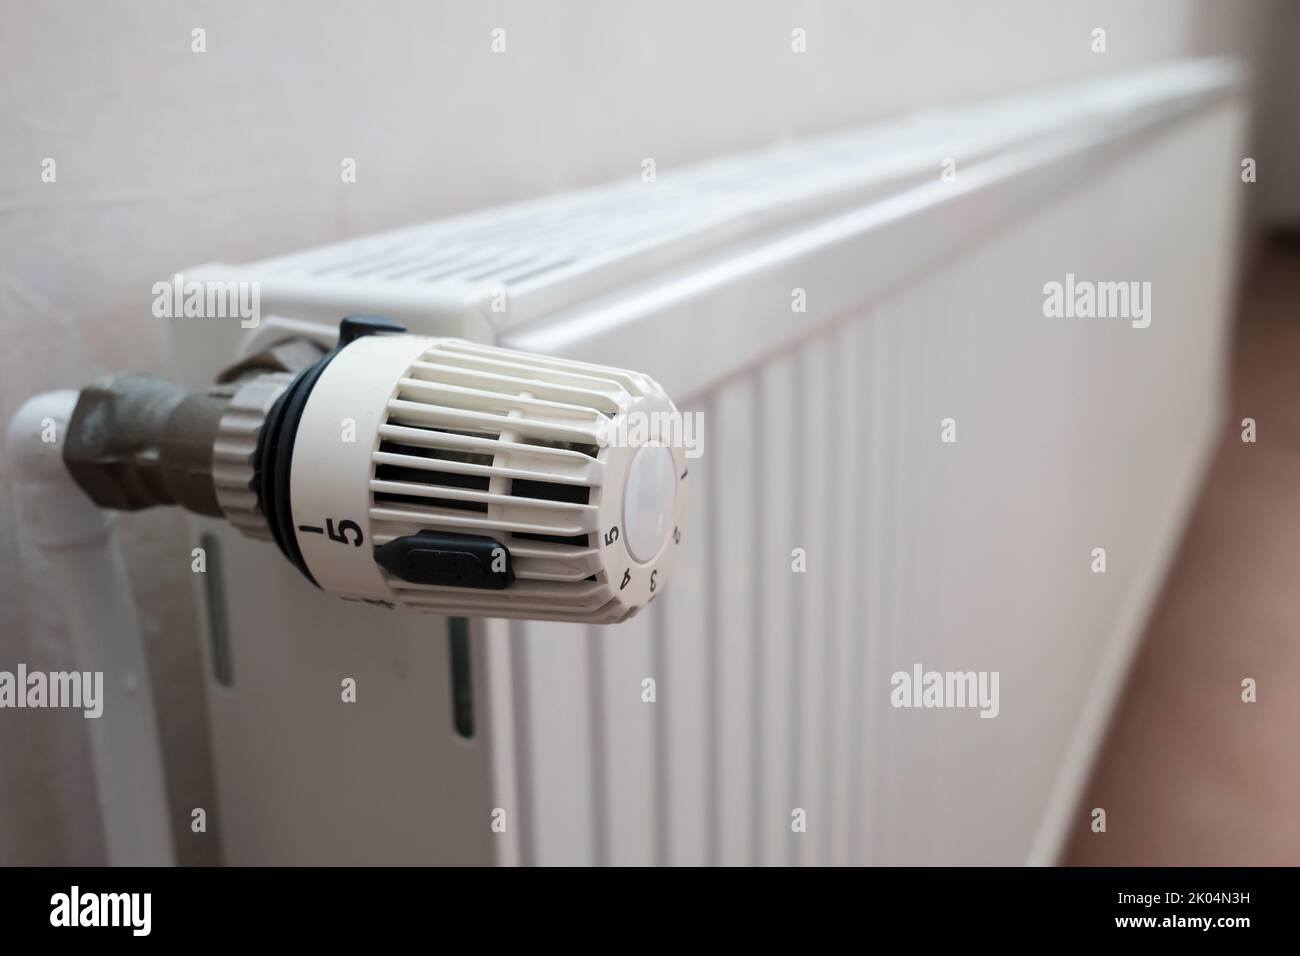 Radiator with thermostat and the ability to turn the knob and reduce the heating temperature. Concept of crisis and increase in heating costs.  Stock Photo